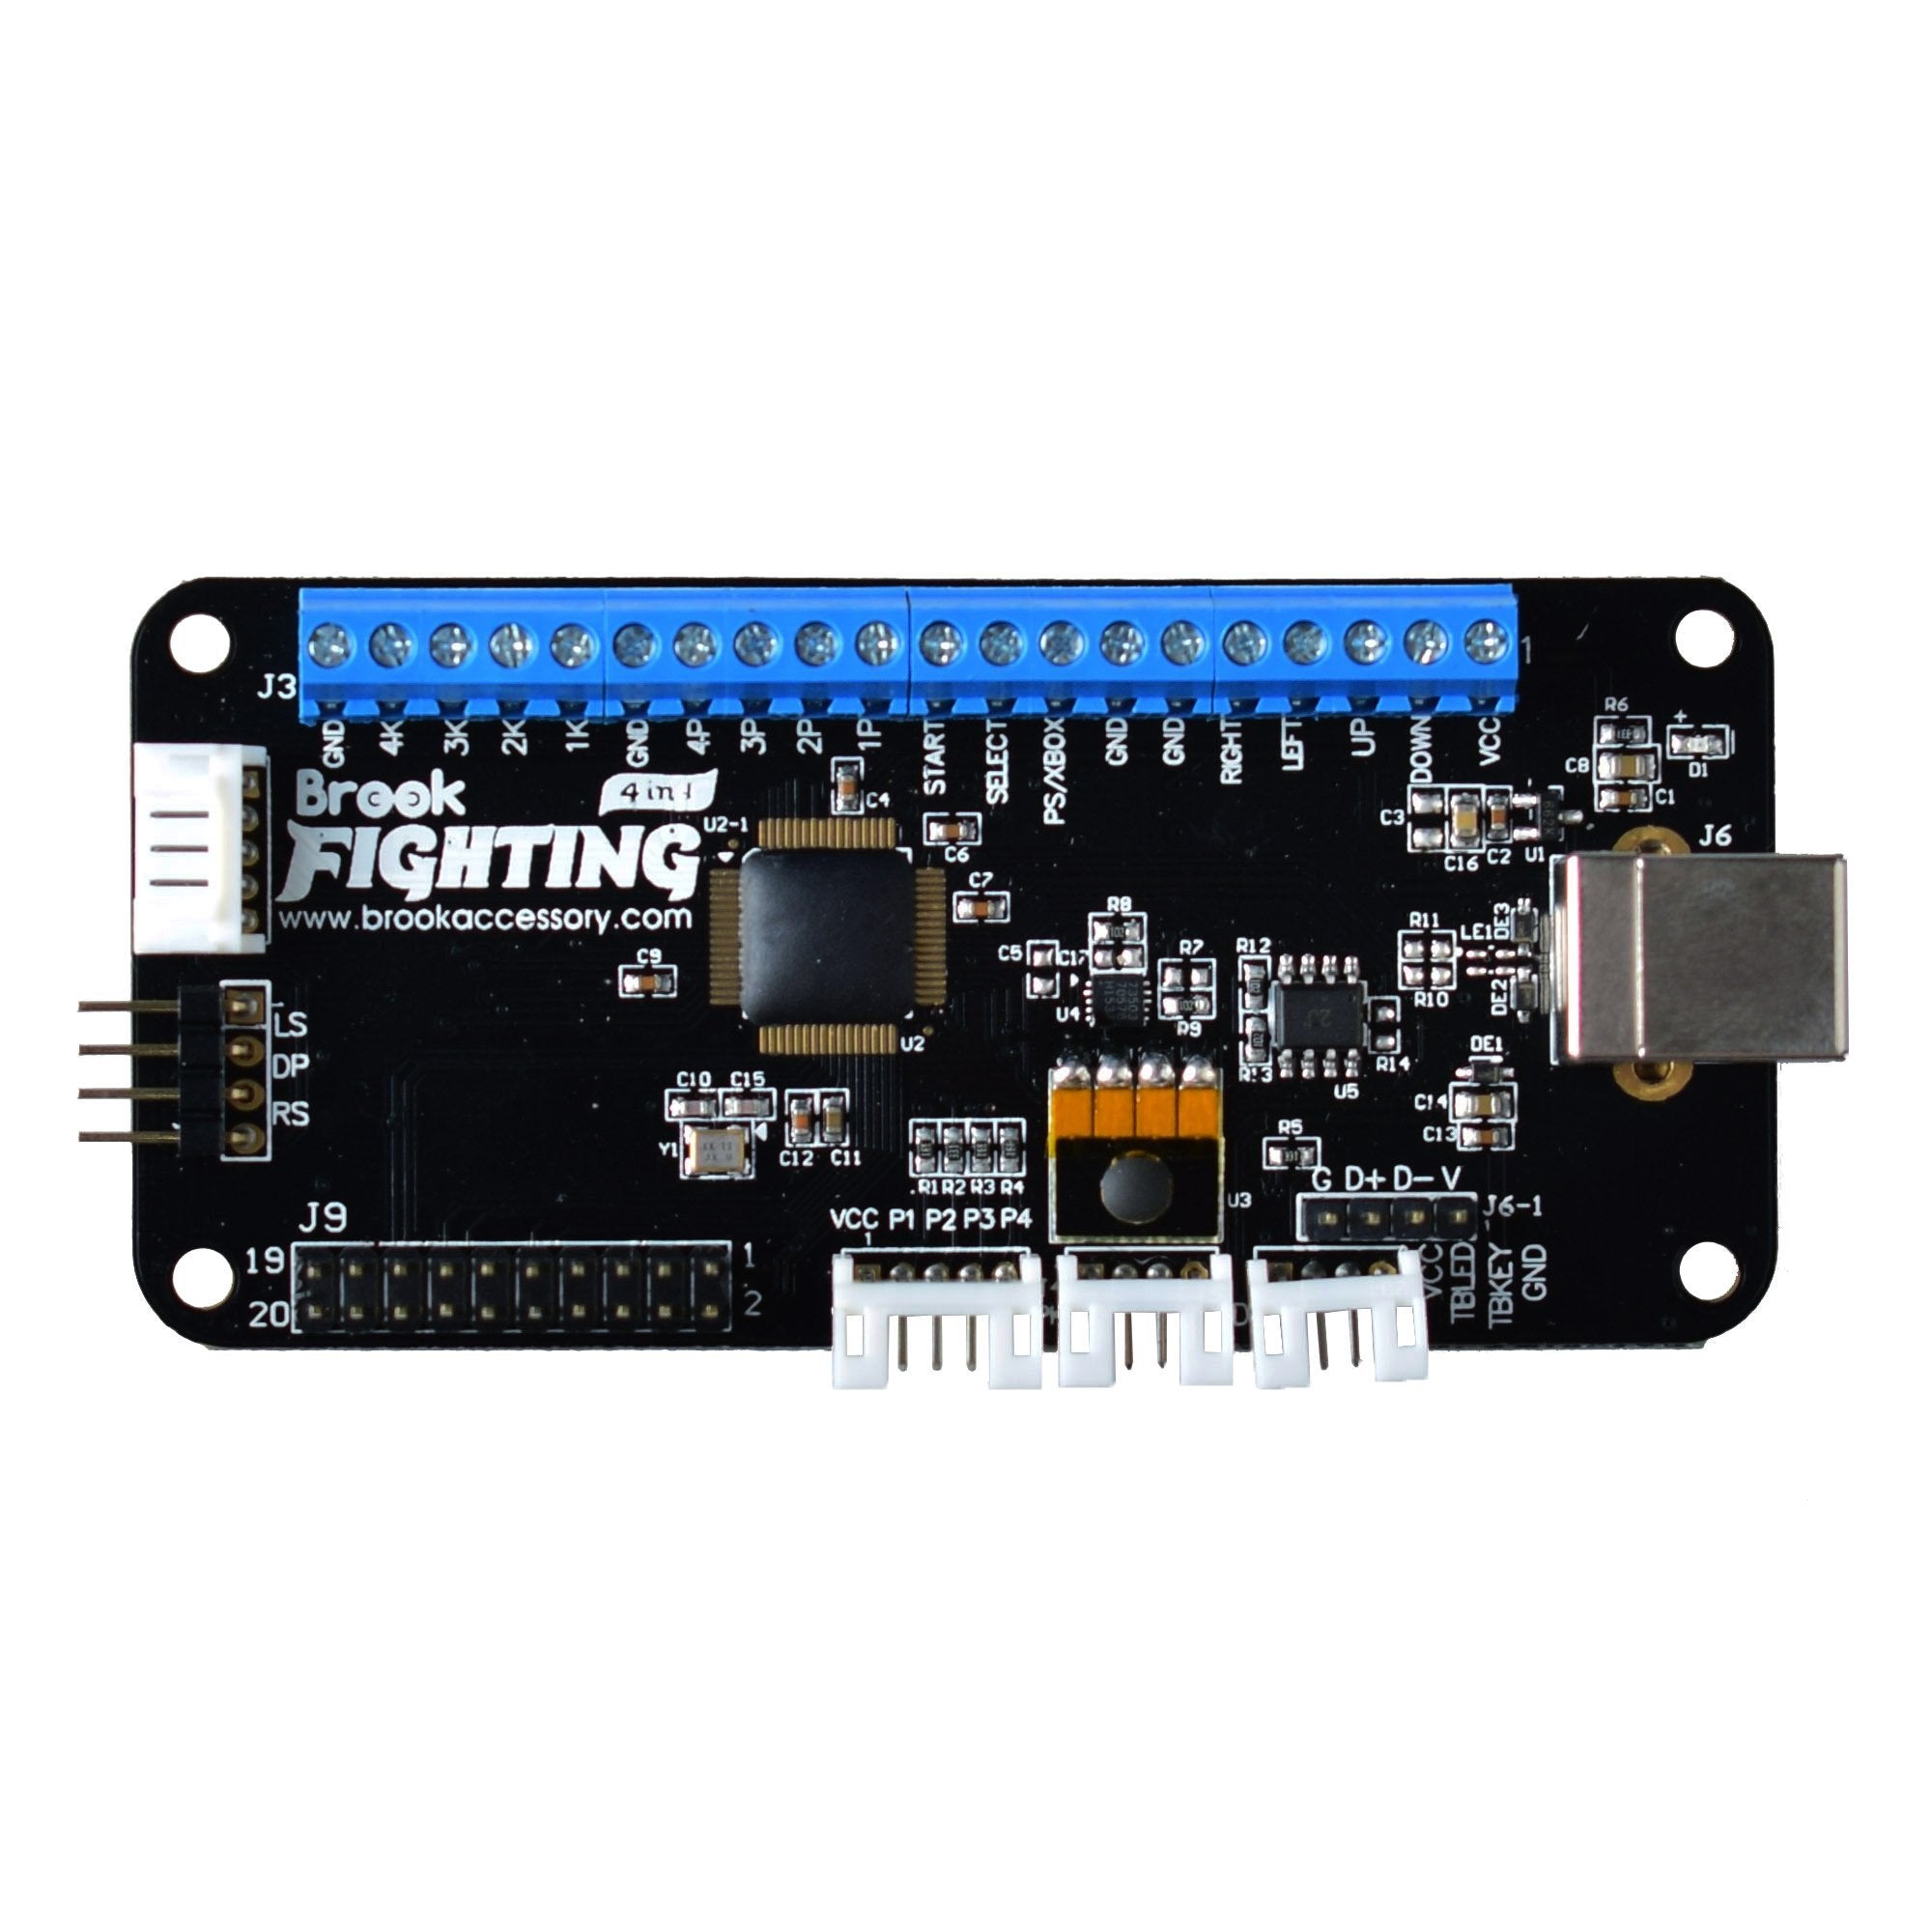 Gaming-Brook Universal Fighting Board (UFB) Pin Pre-added for Xbox One/Xbox 360/PS4/PS3/Wiii U/PC (MM00005095)